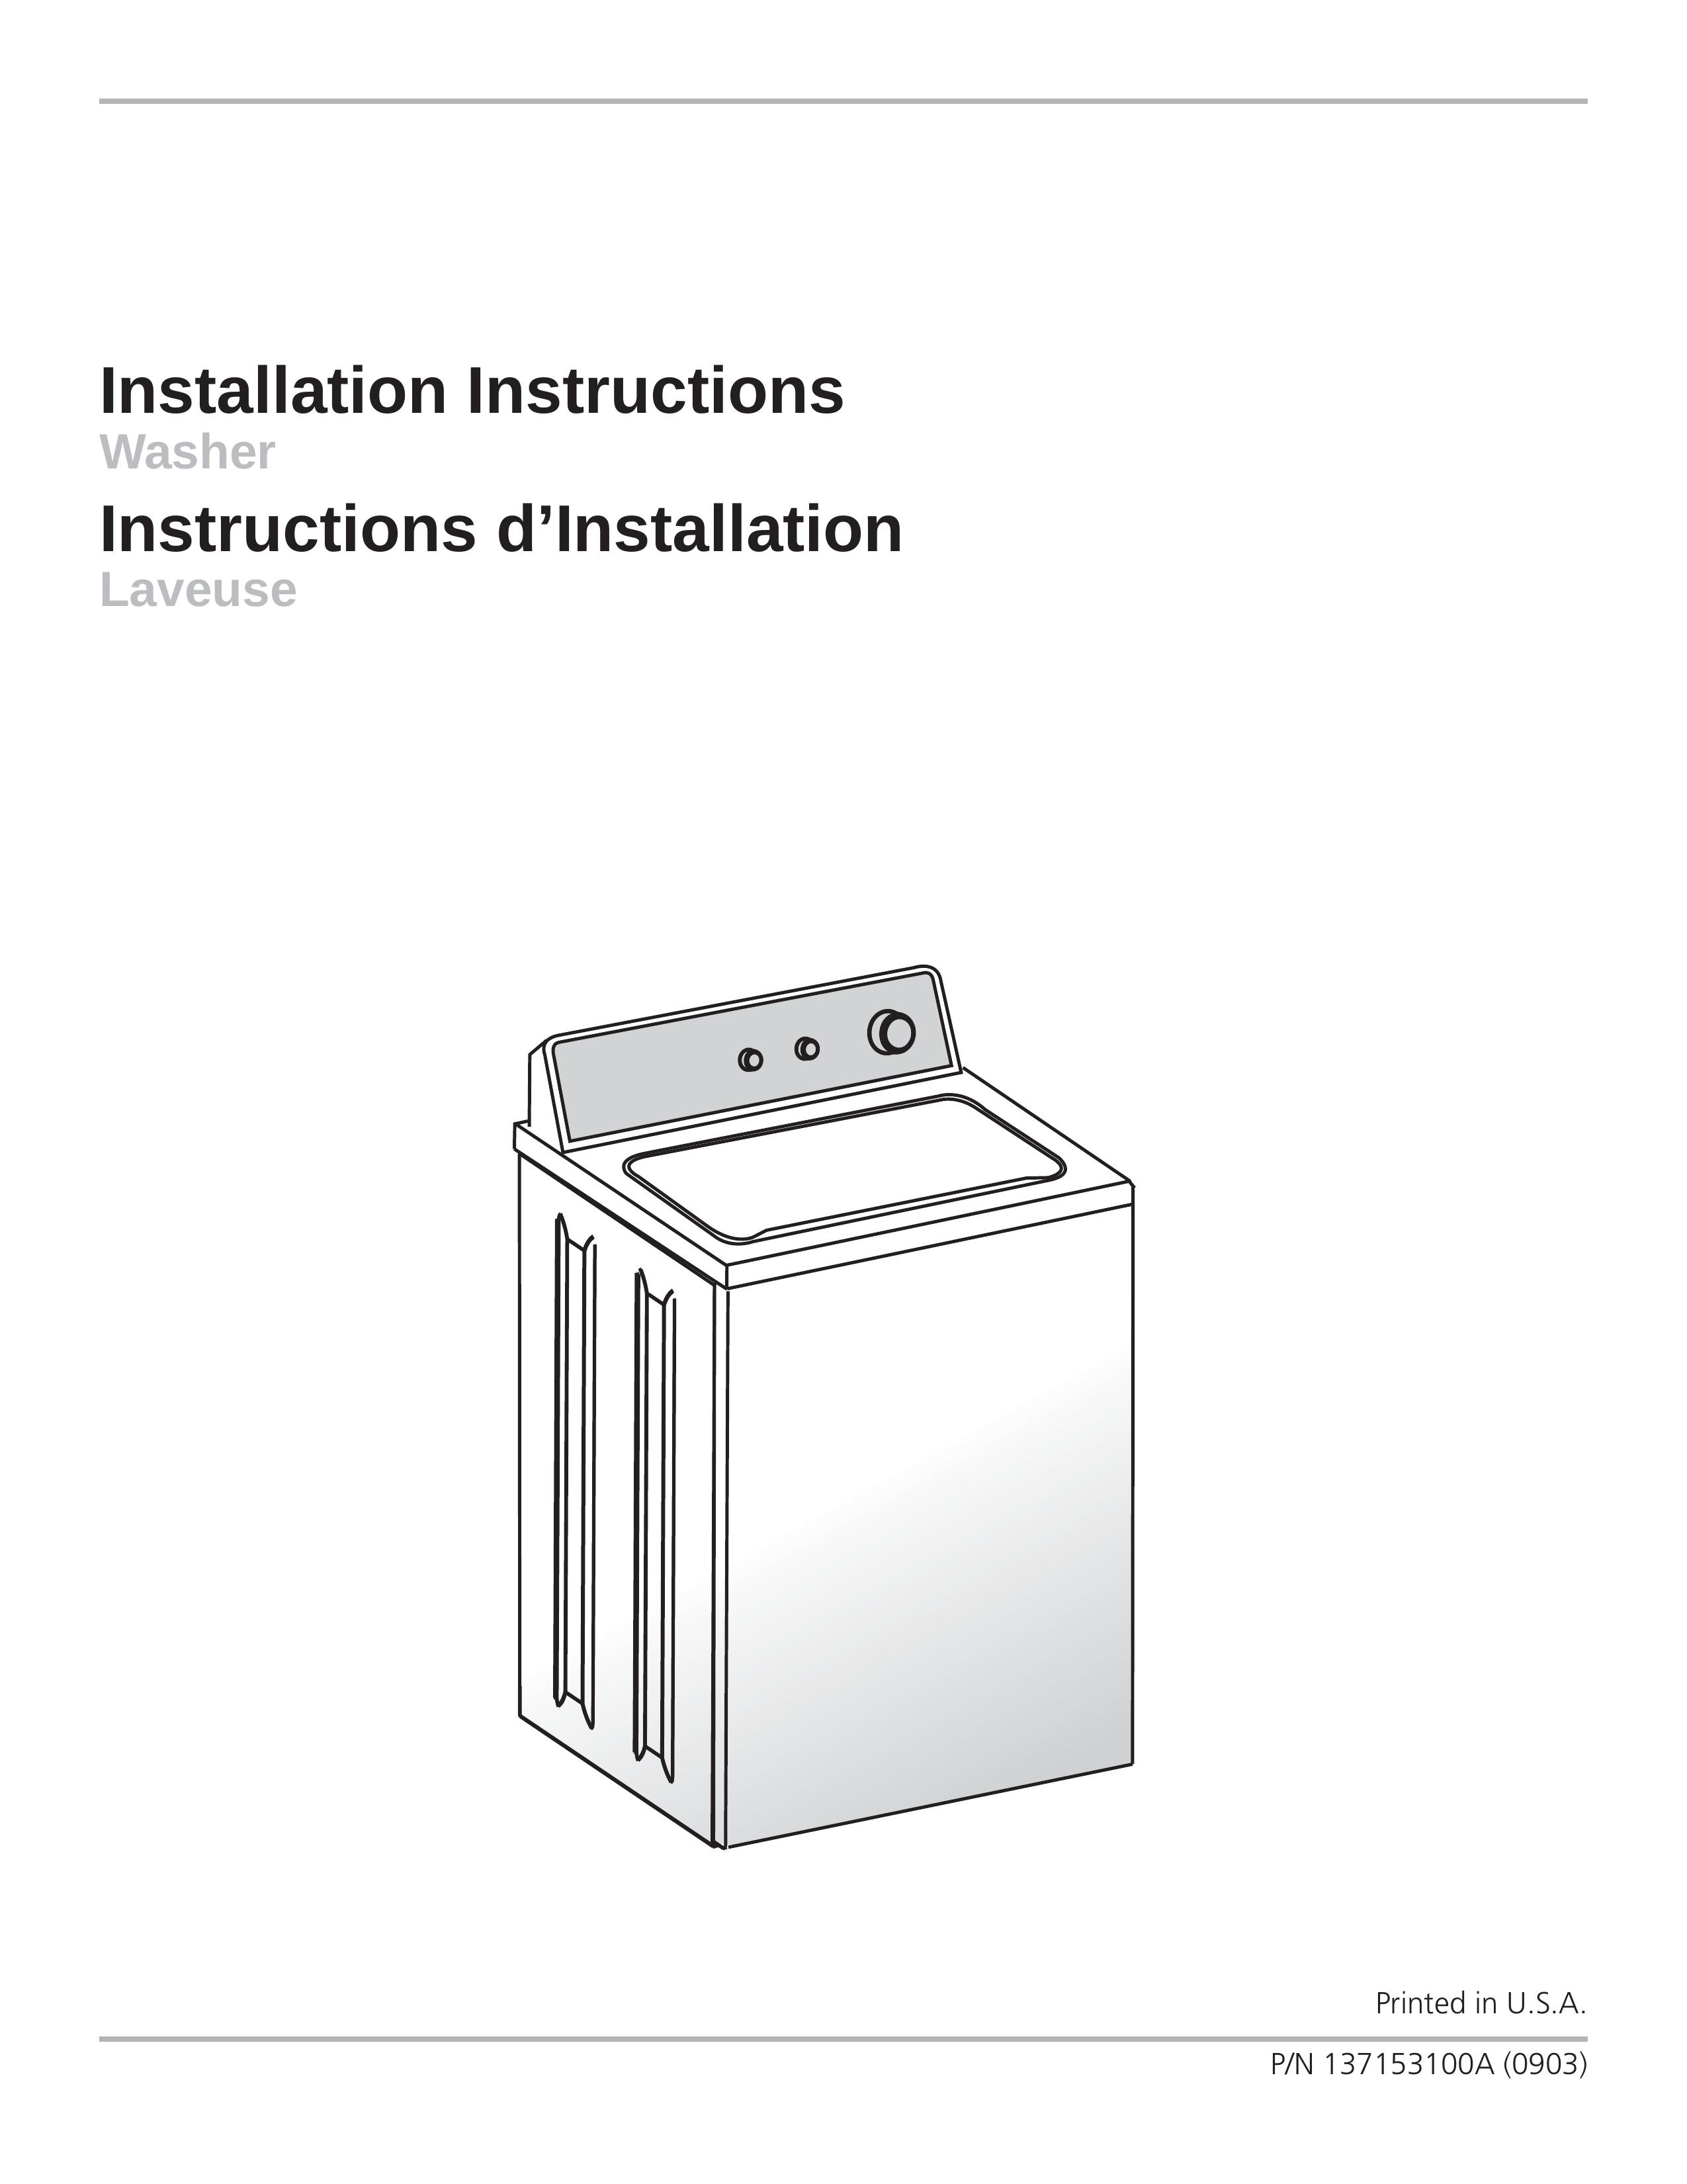 Frigidaire 137153100A (0903) Washer User Manual